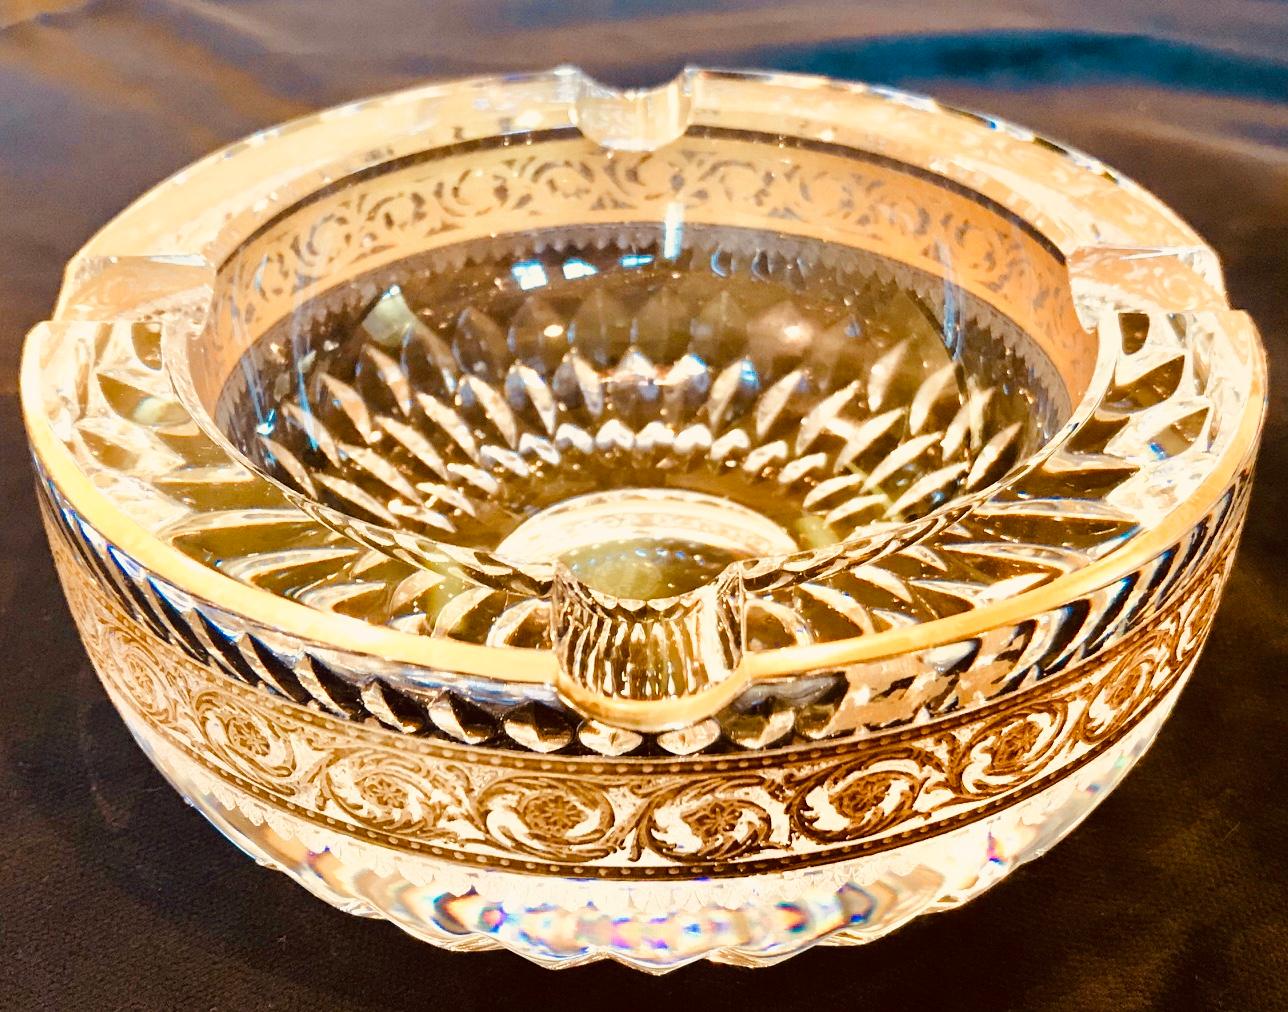 Saint Louis gold thistle has been in continuous production since 1908 and has graced many formal tables in Europe and the world. This heavy, highly detailed ash tray from production in the late 1980s is a beautiful addition to the library or smoking